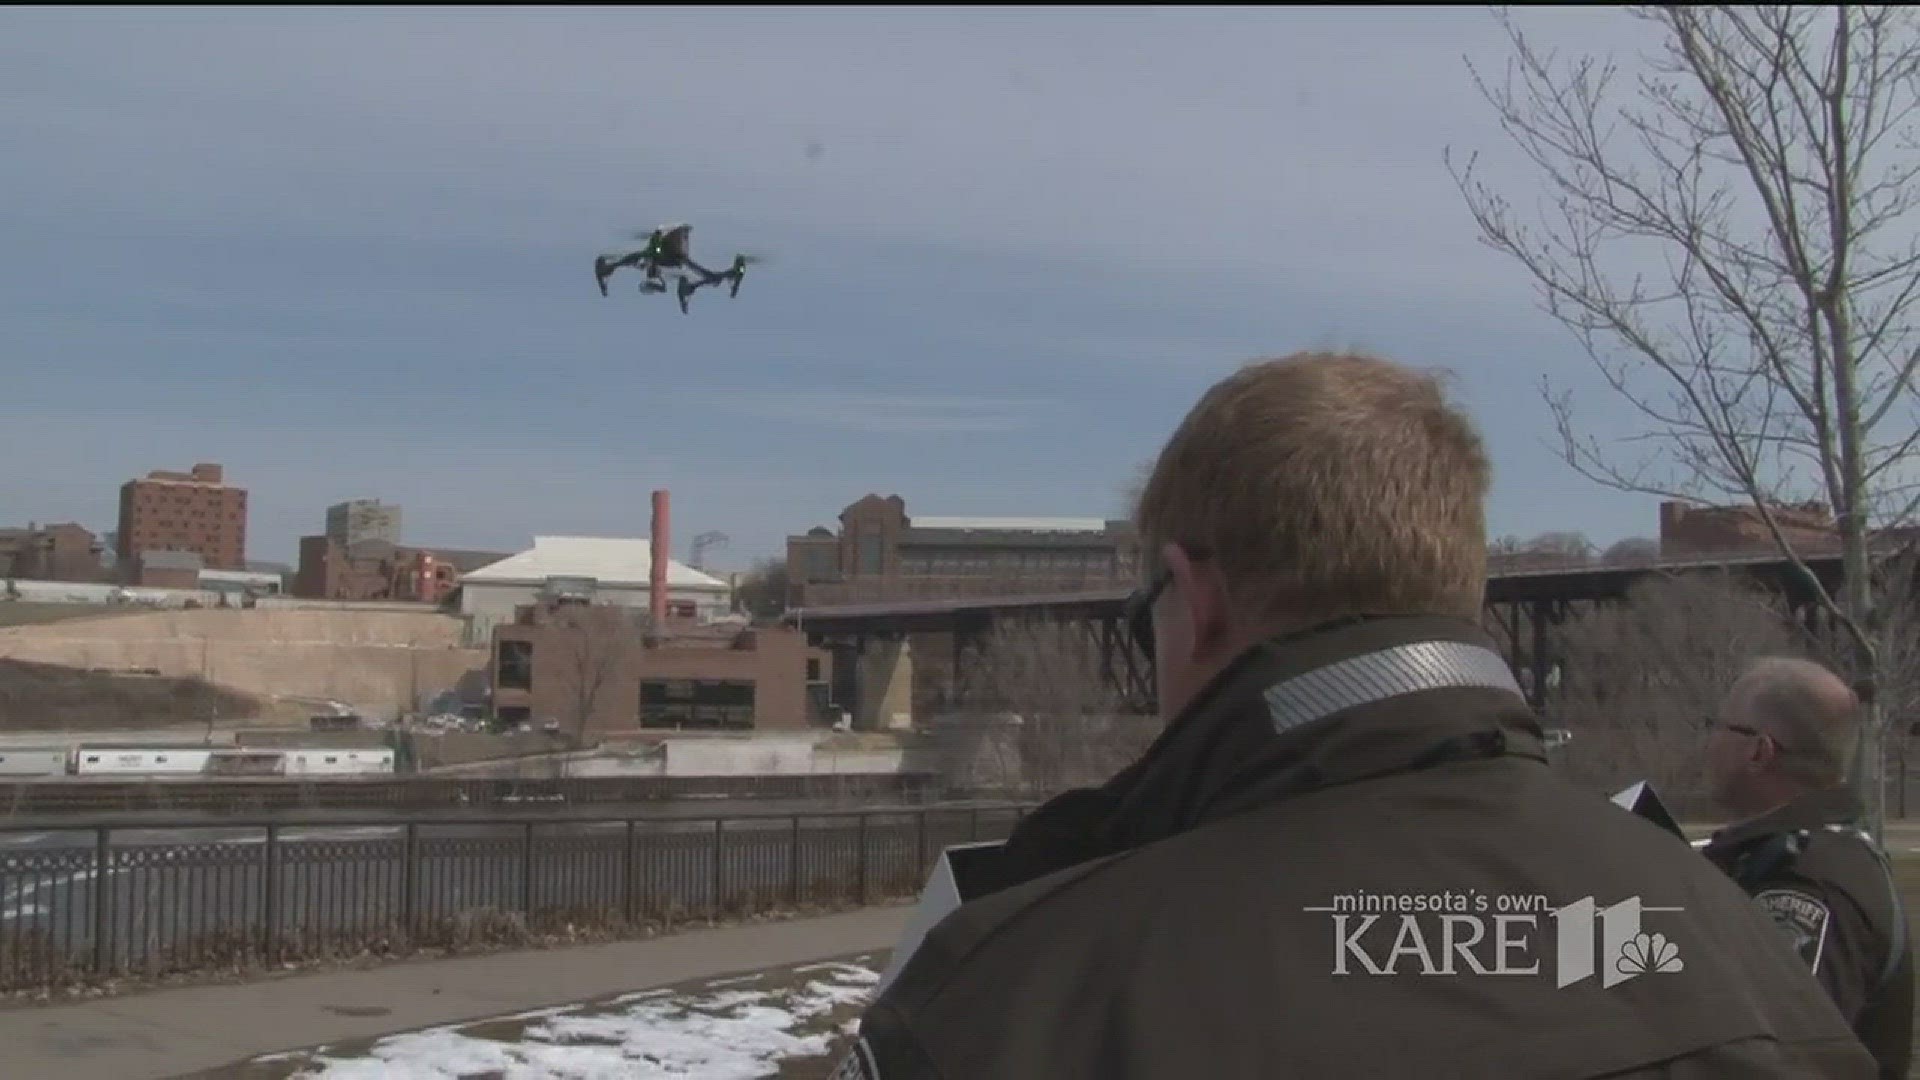 Drones help with search and rescue